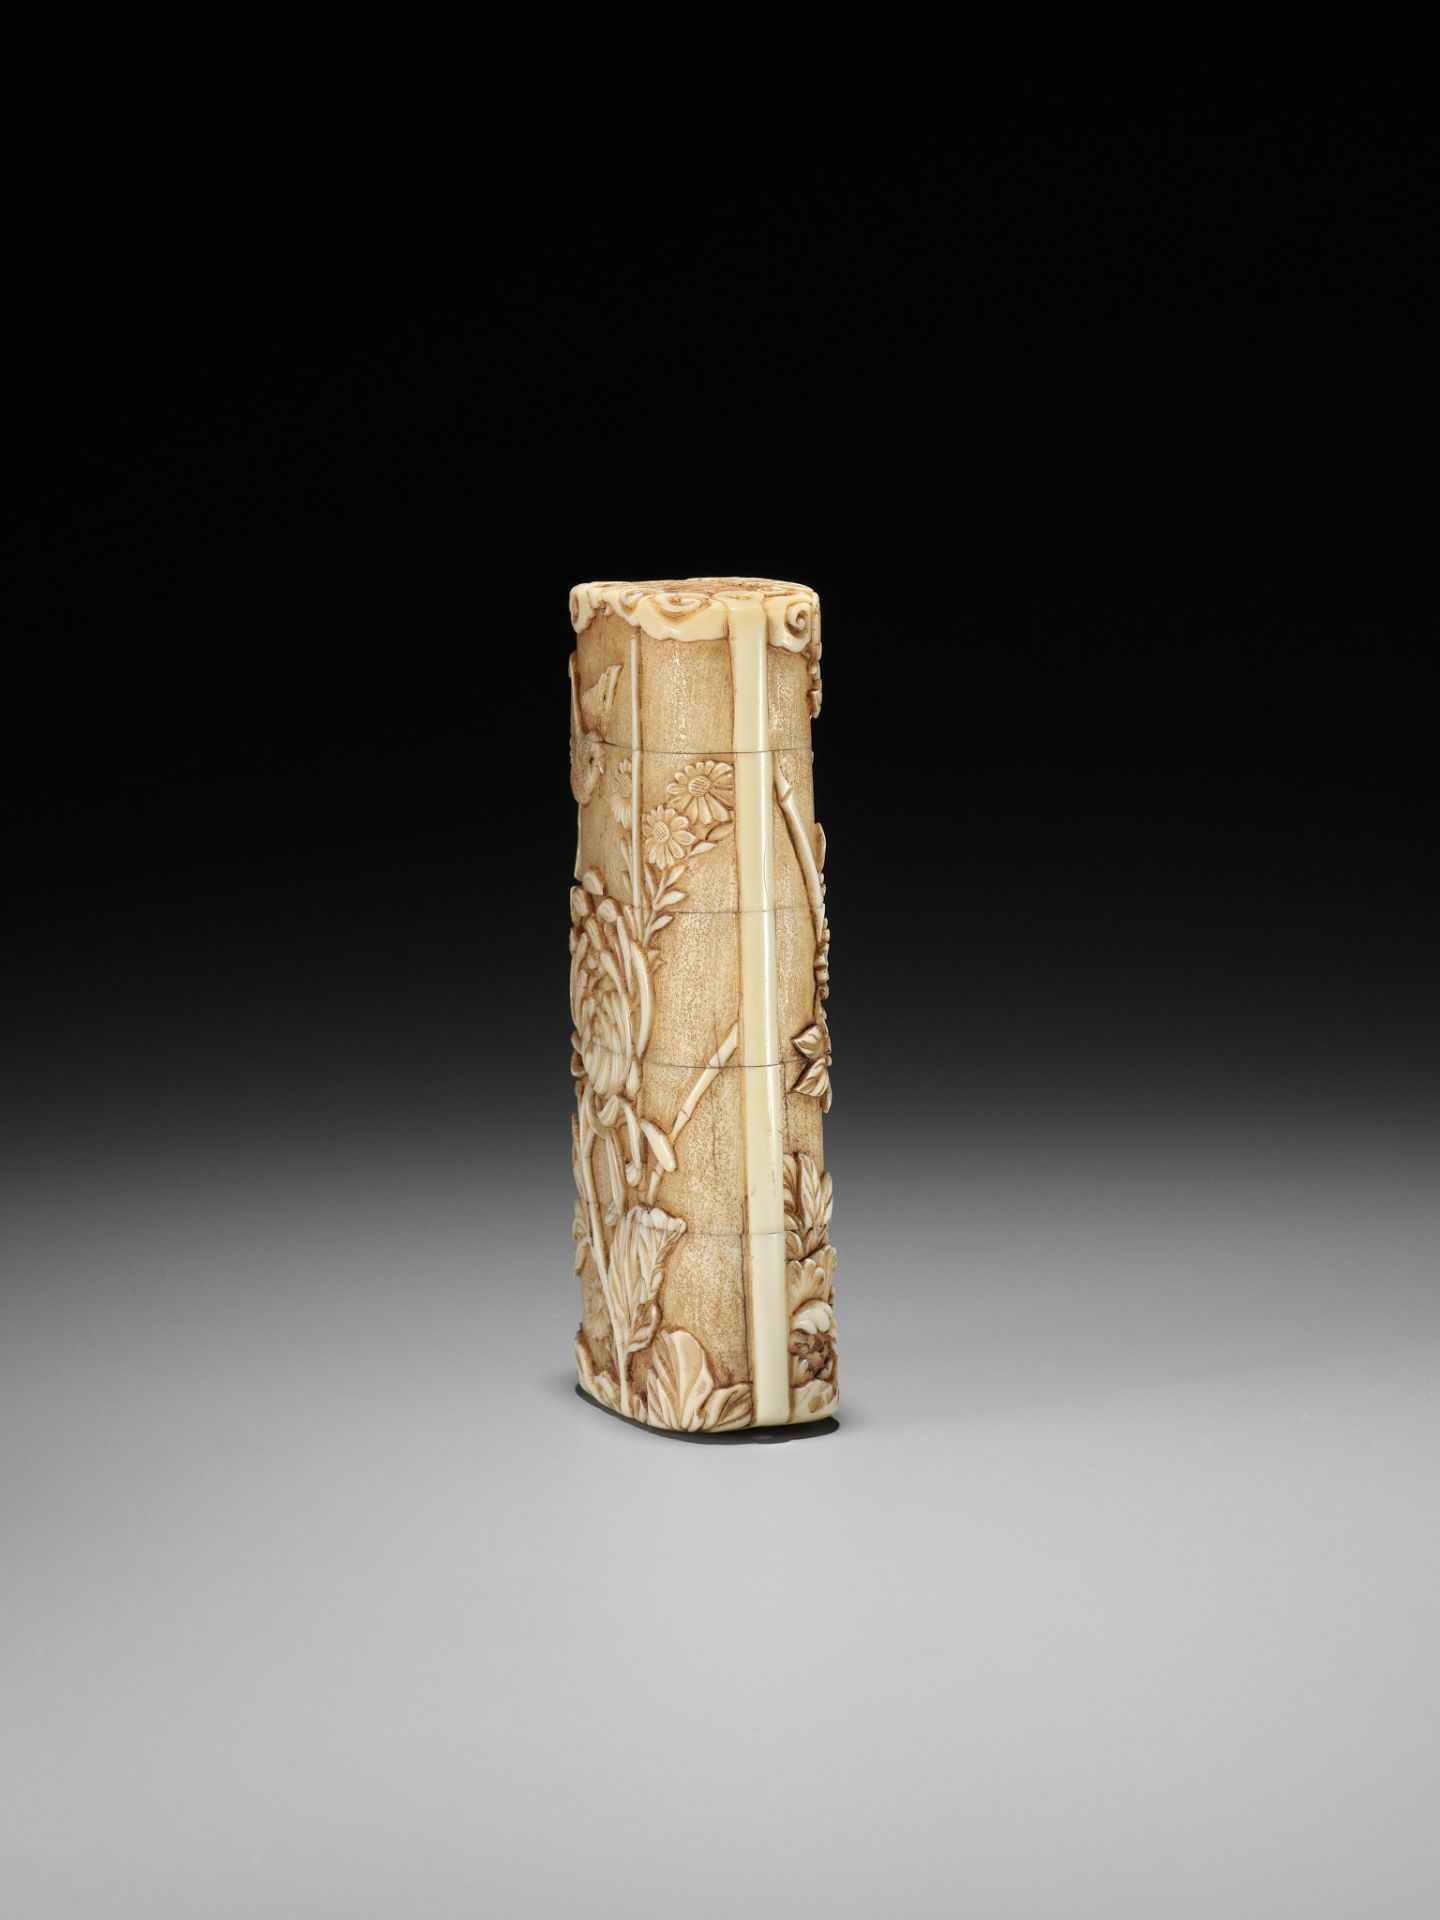 A MASTERFUL WALRUS TUSK FOUR-CASE INRO DEPICTING A SWALLOW AMONGST FLOWERS - Image 9 of 12